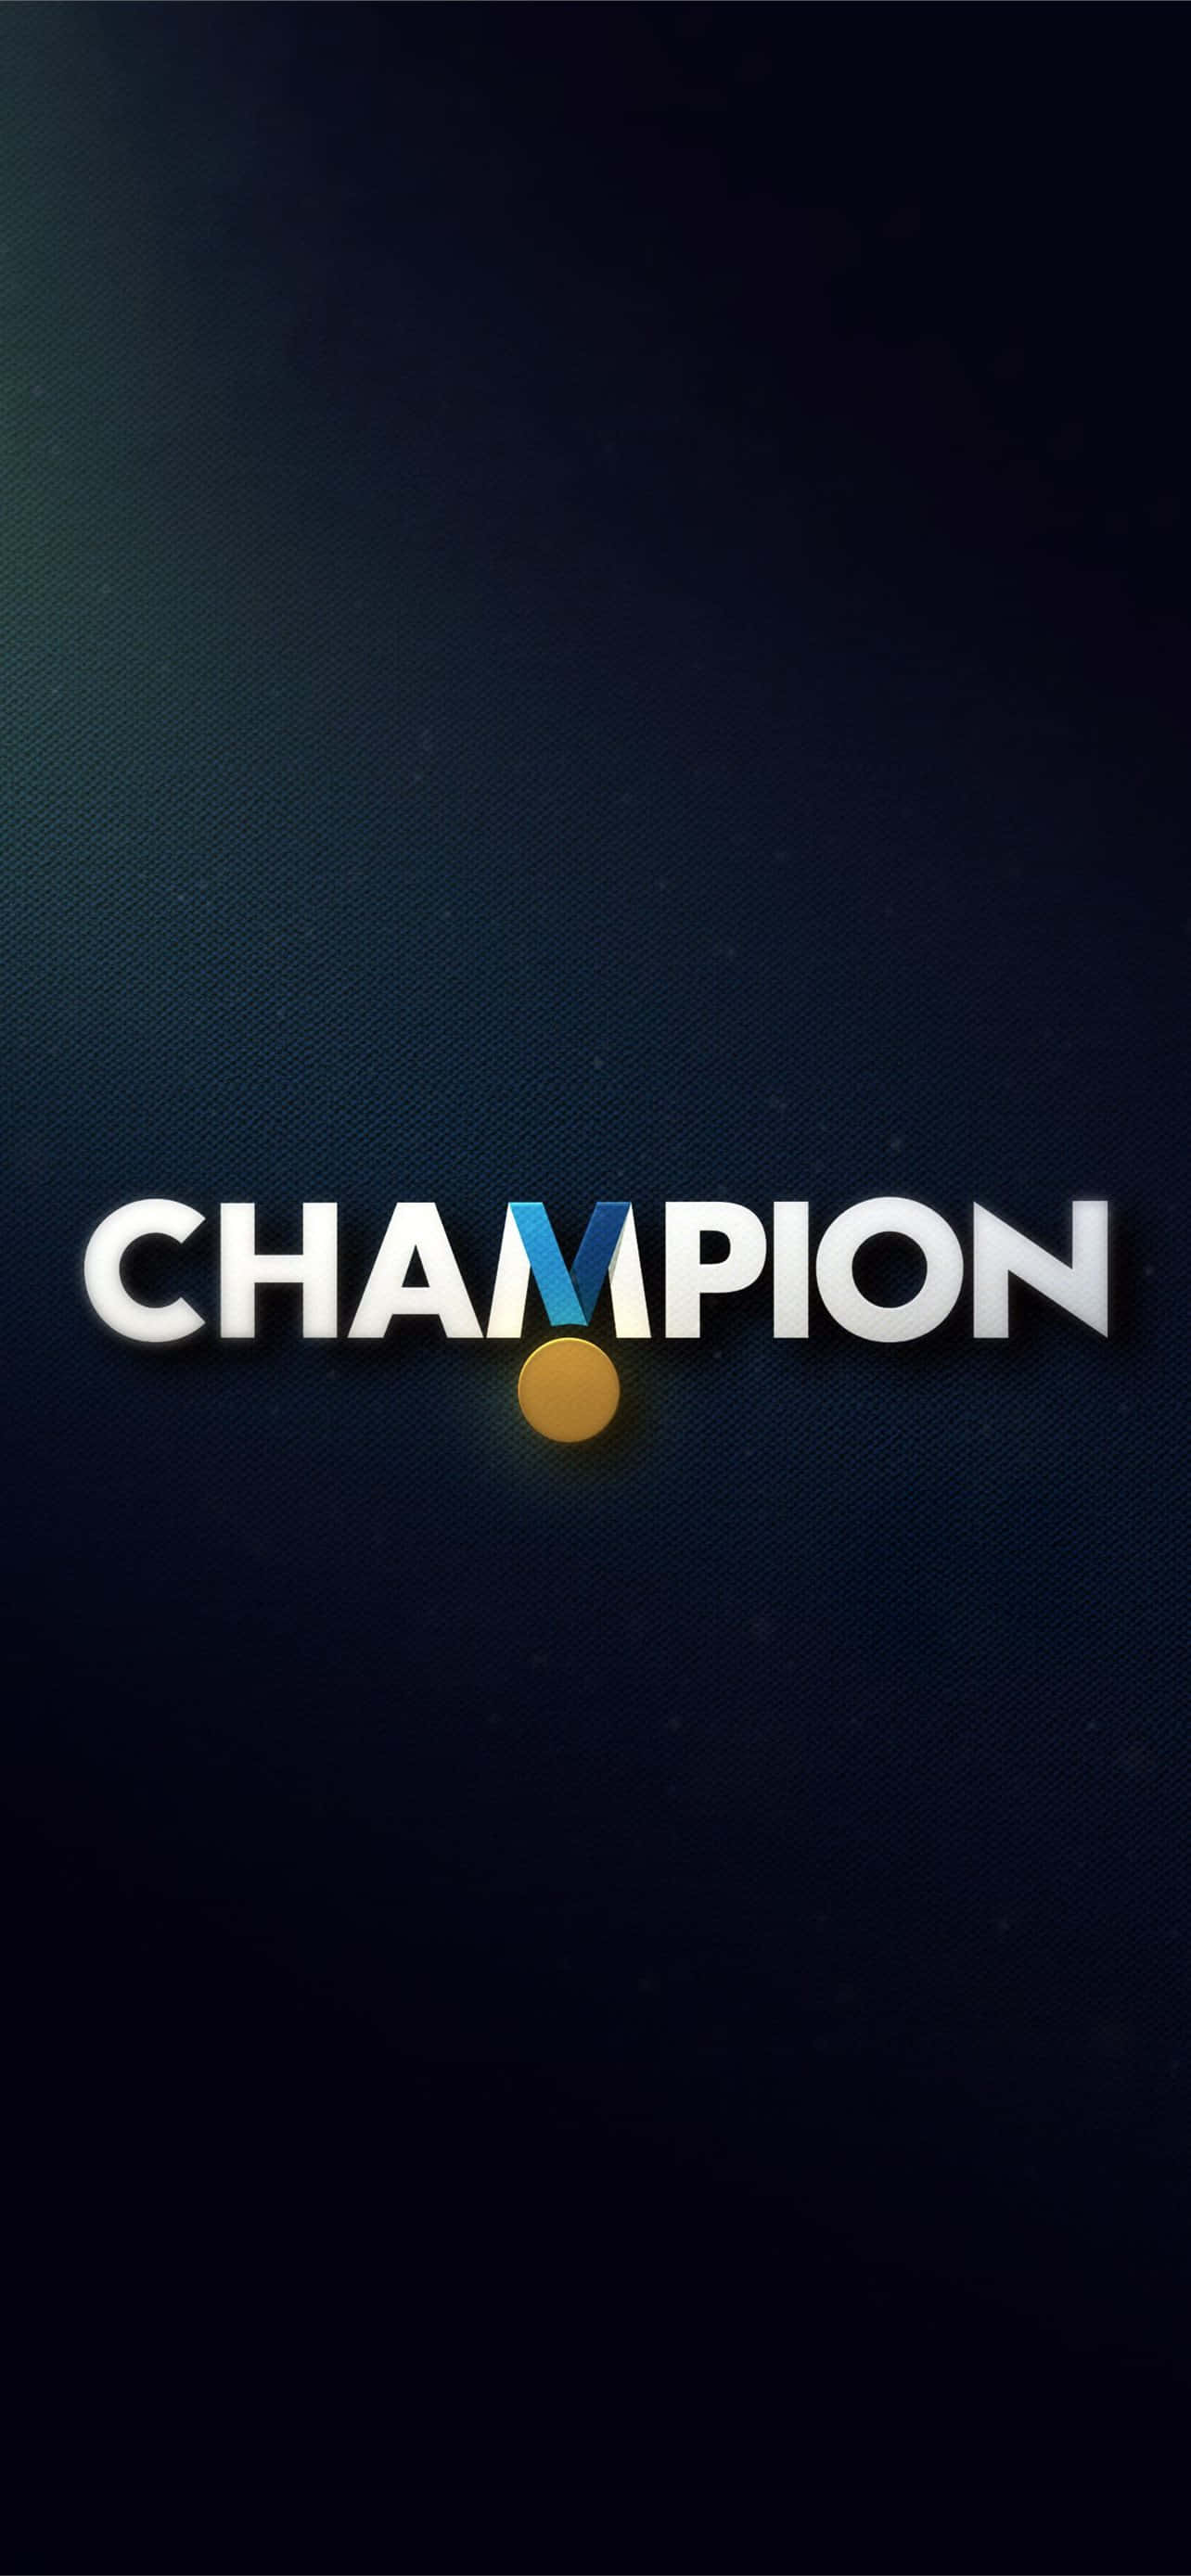 Get geared up with Champion